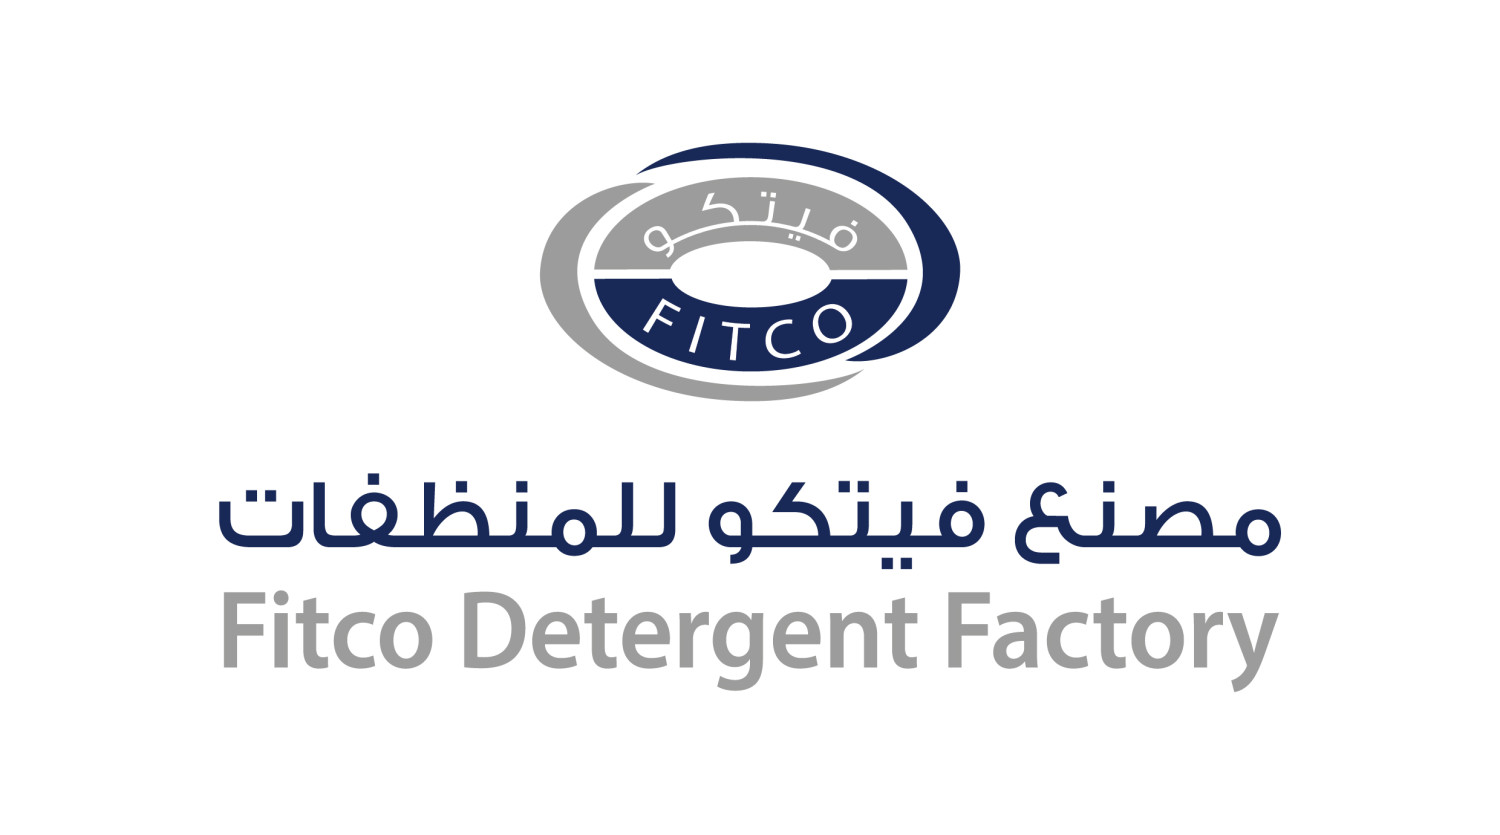 FITCO Detergent Factory